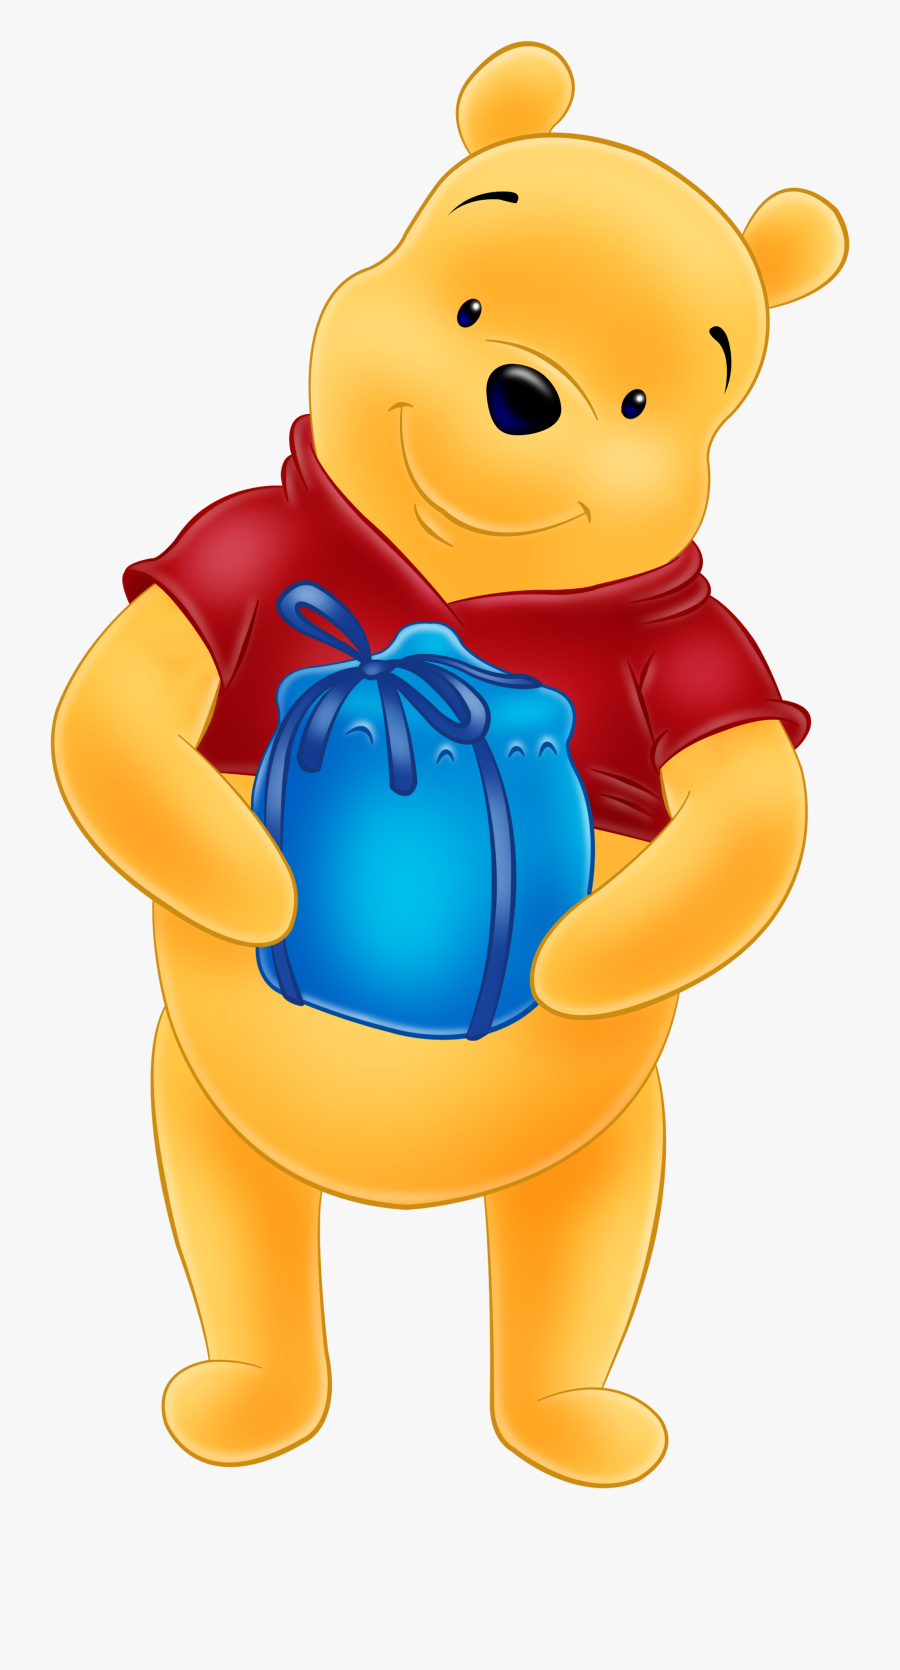 Winnie Pooh Png Images Free Download - Winnie The Pooh Png, Transparent Clipart